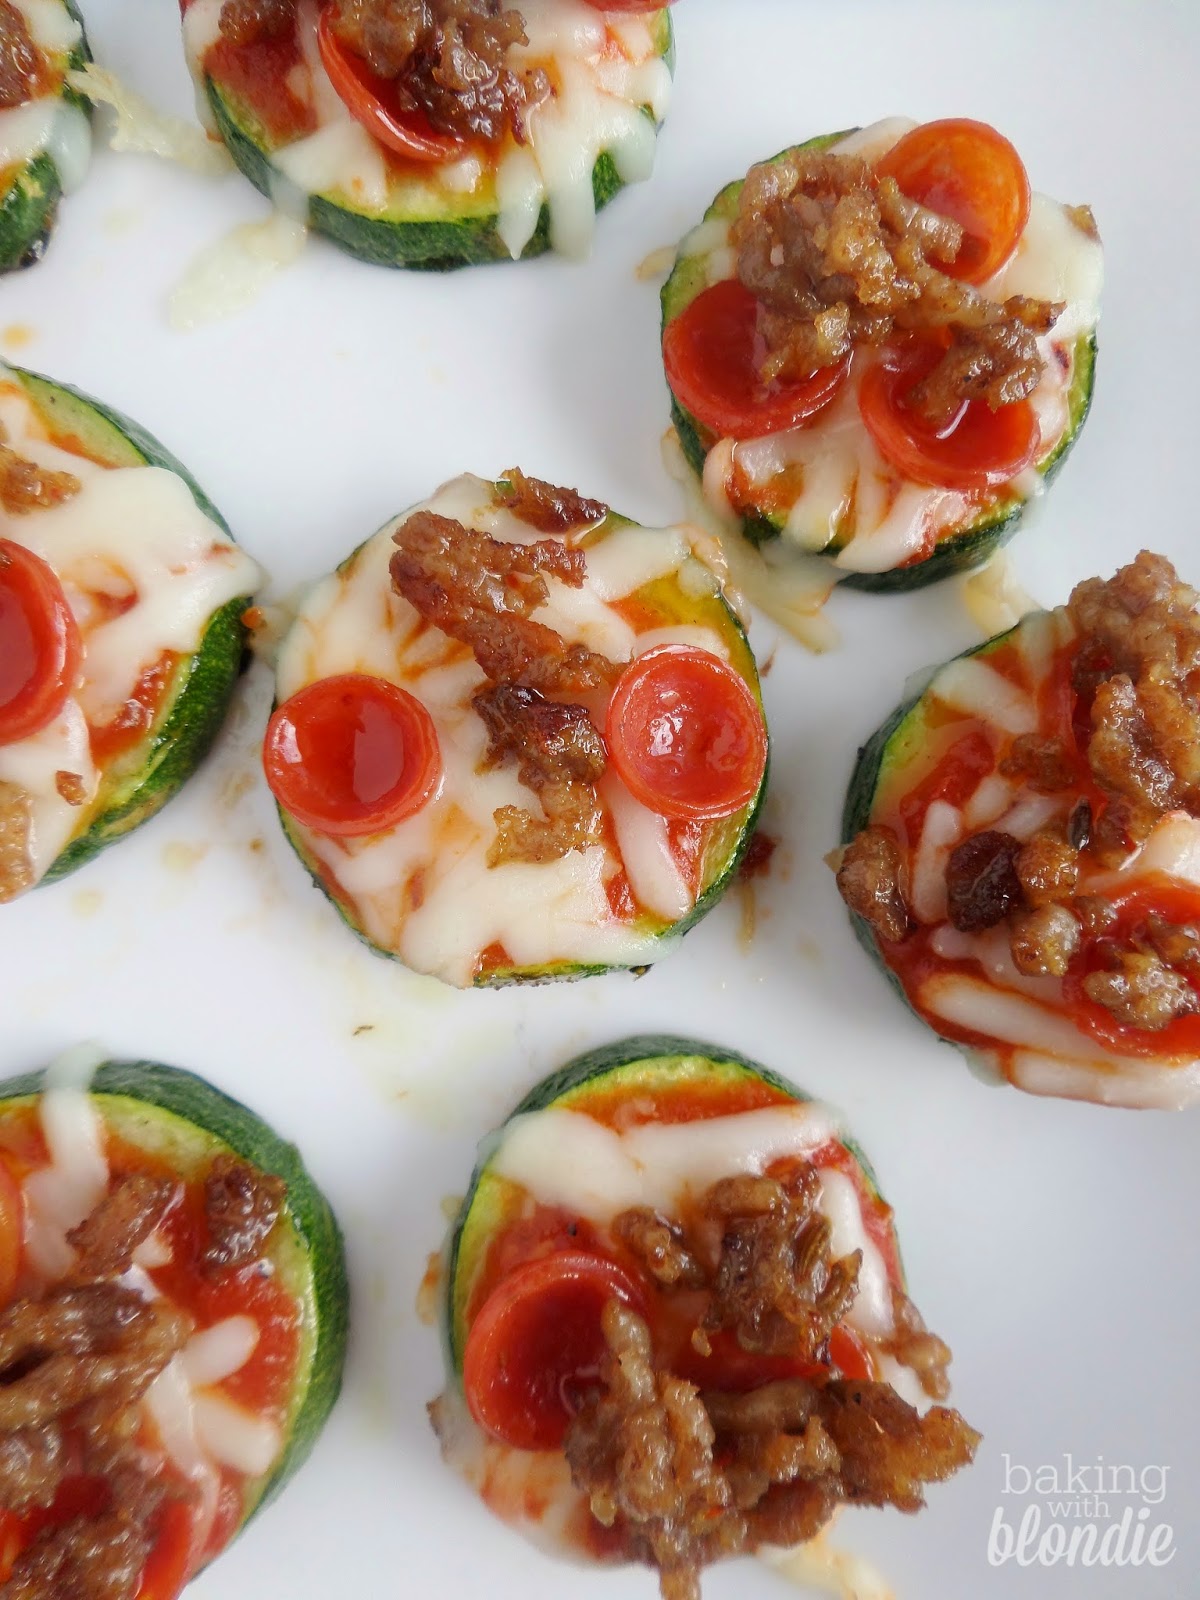 Top view of stuffed pizza peppers on a plate.